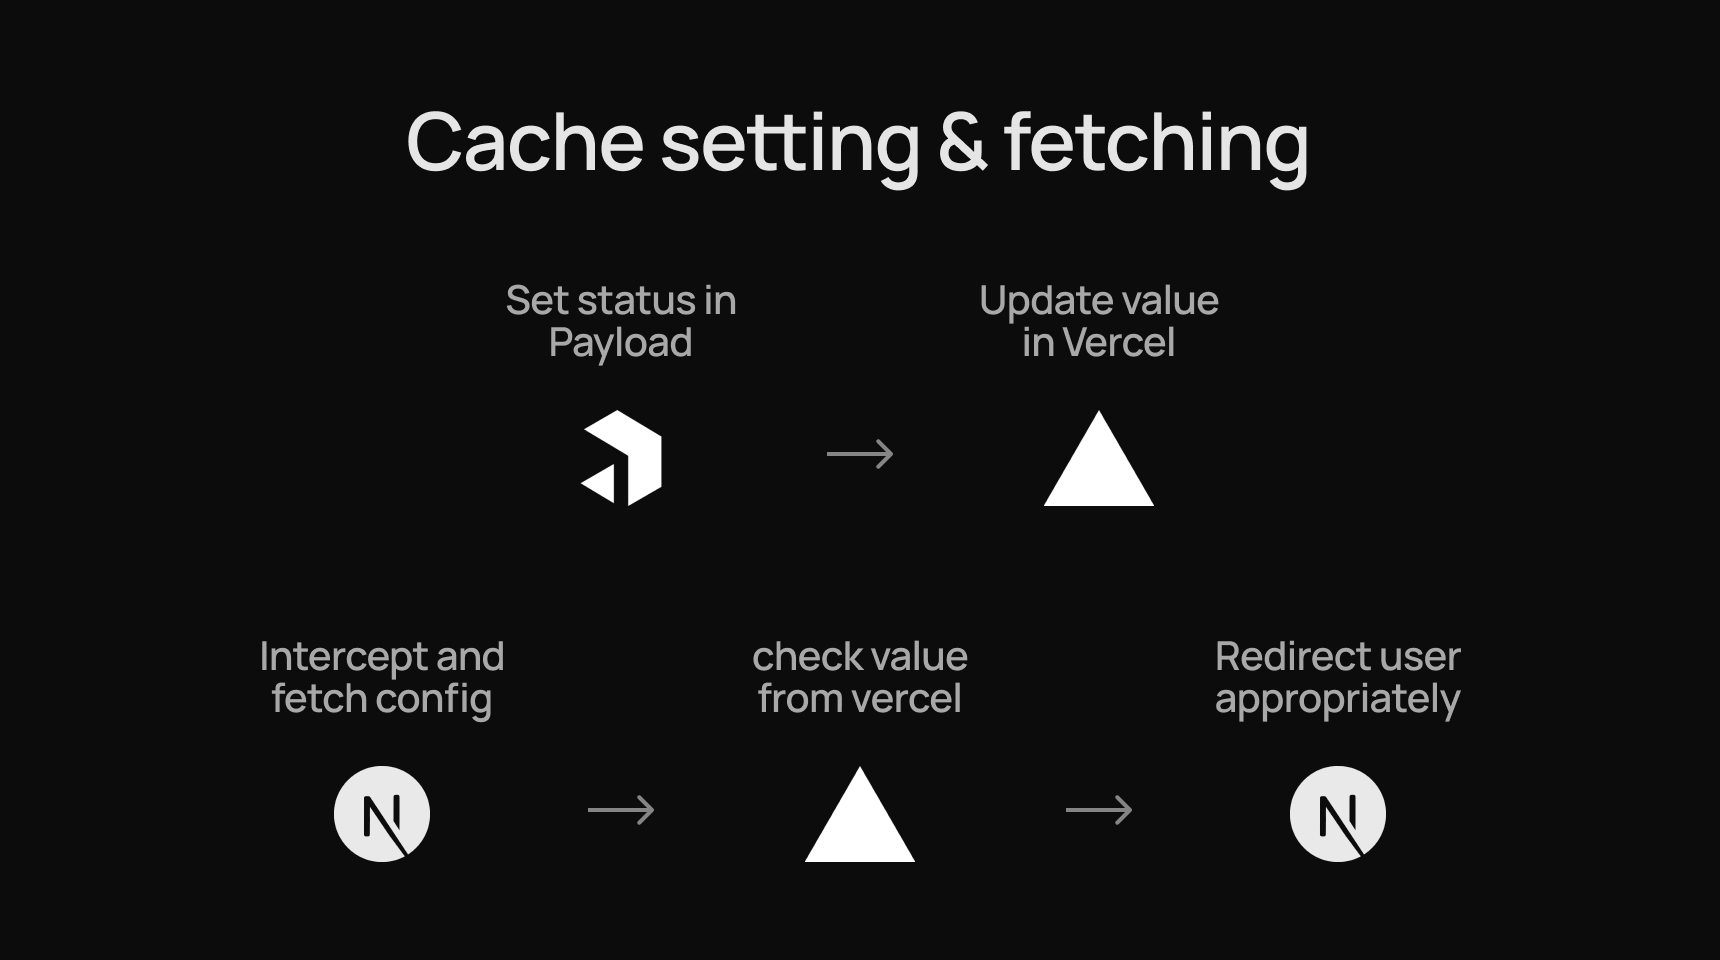 Cache strategy